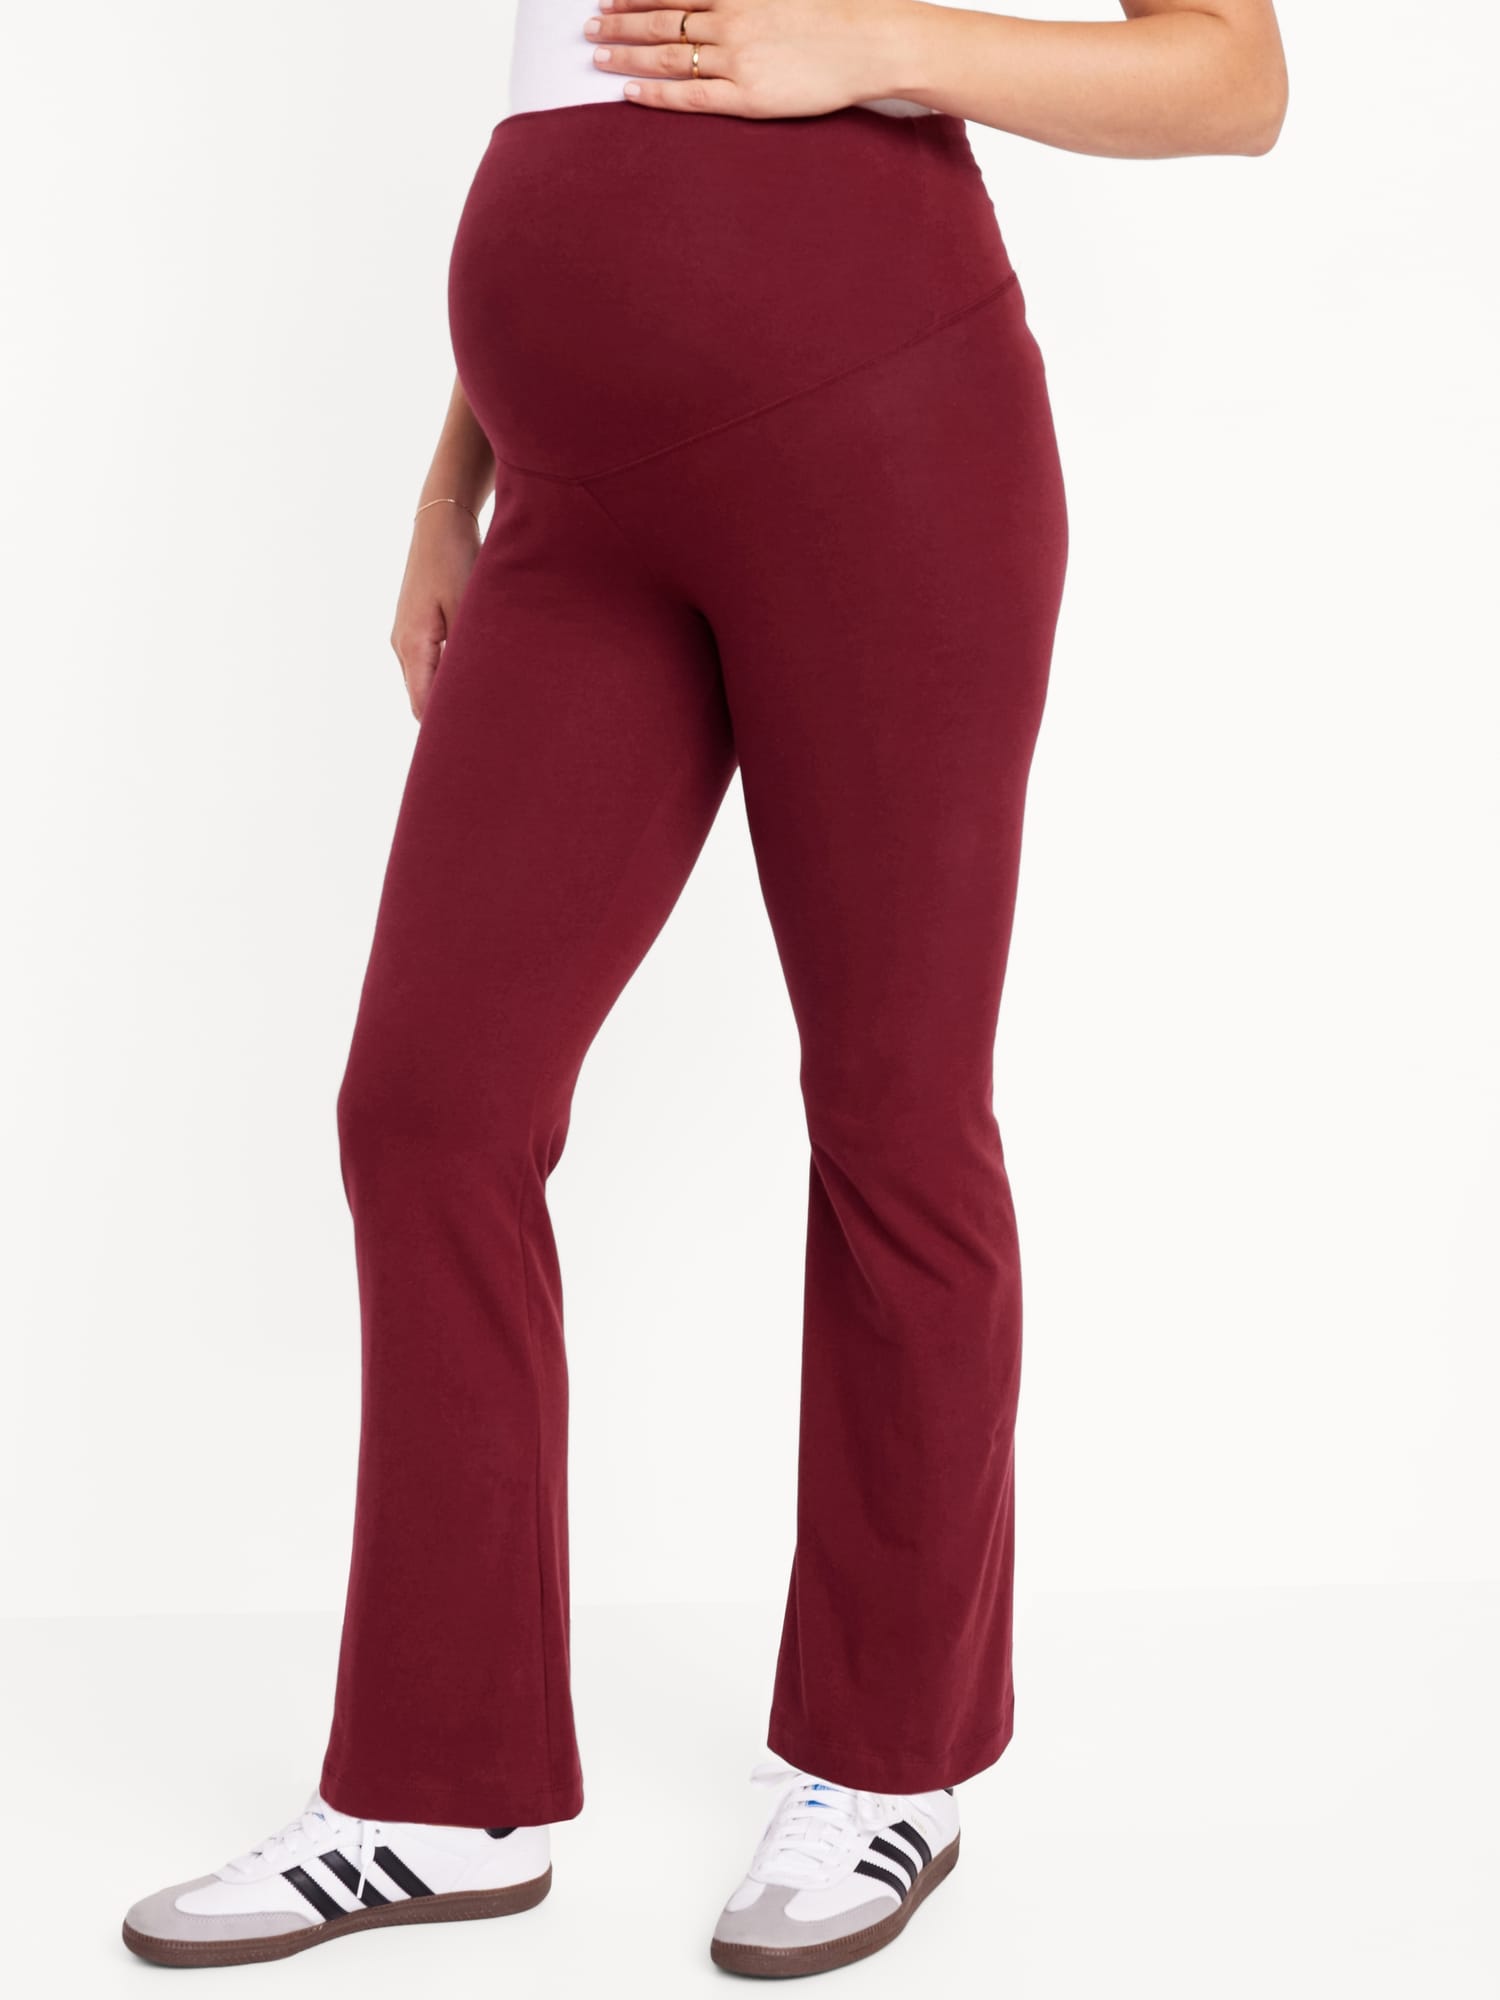 Old Navy - Maternity Solid Maroon Burgundy Leggings Size L